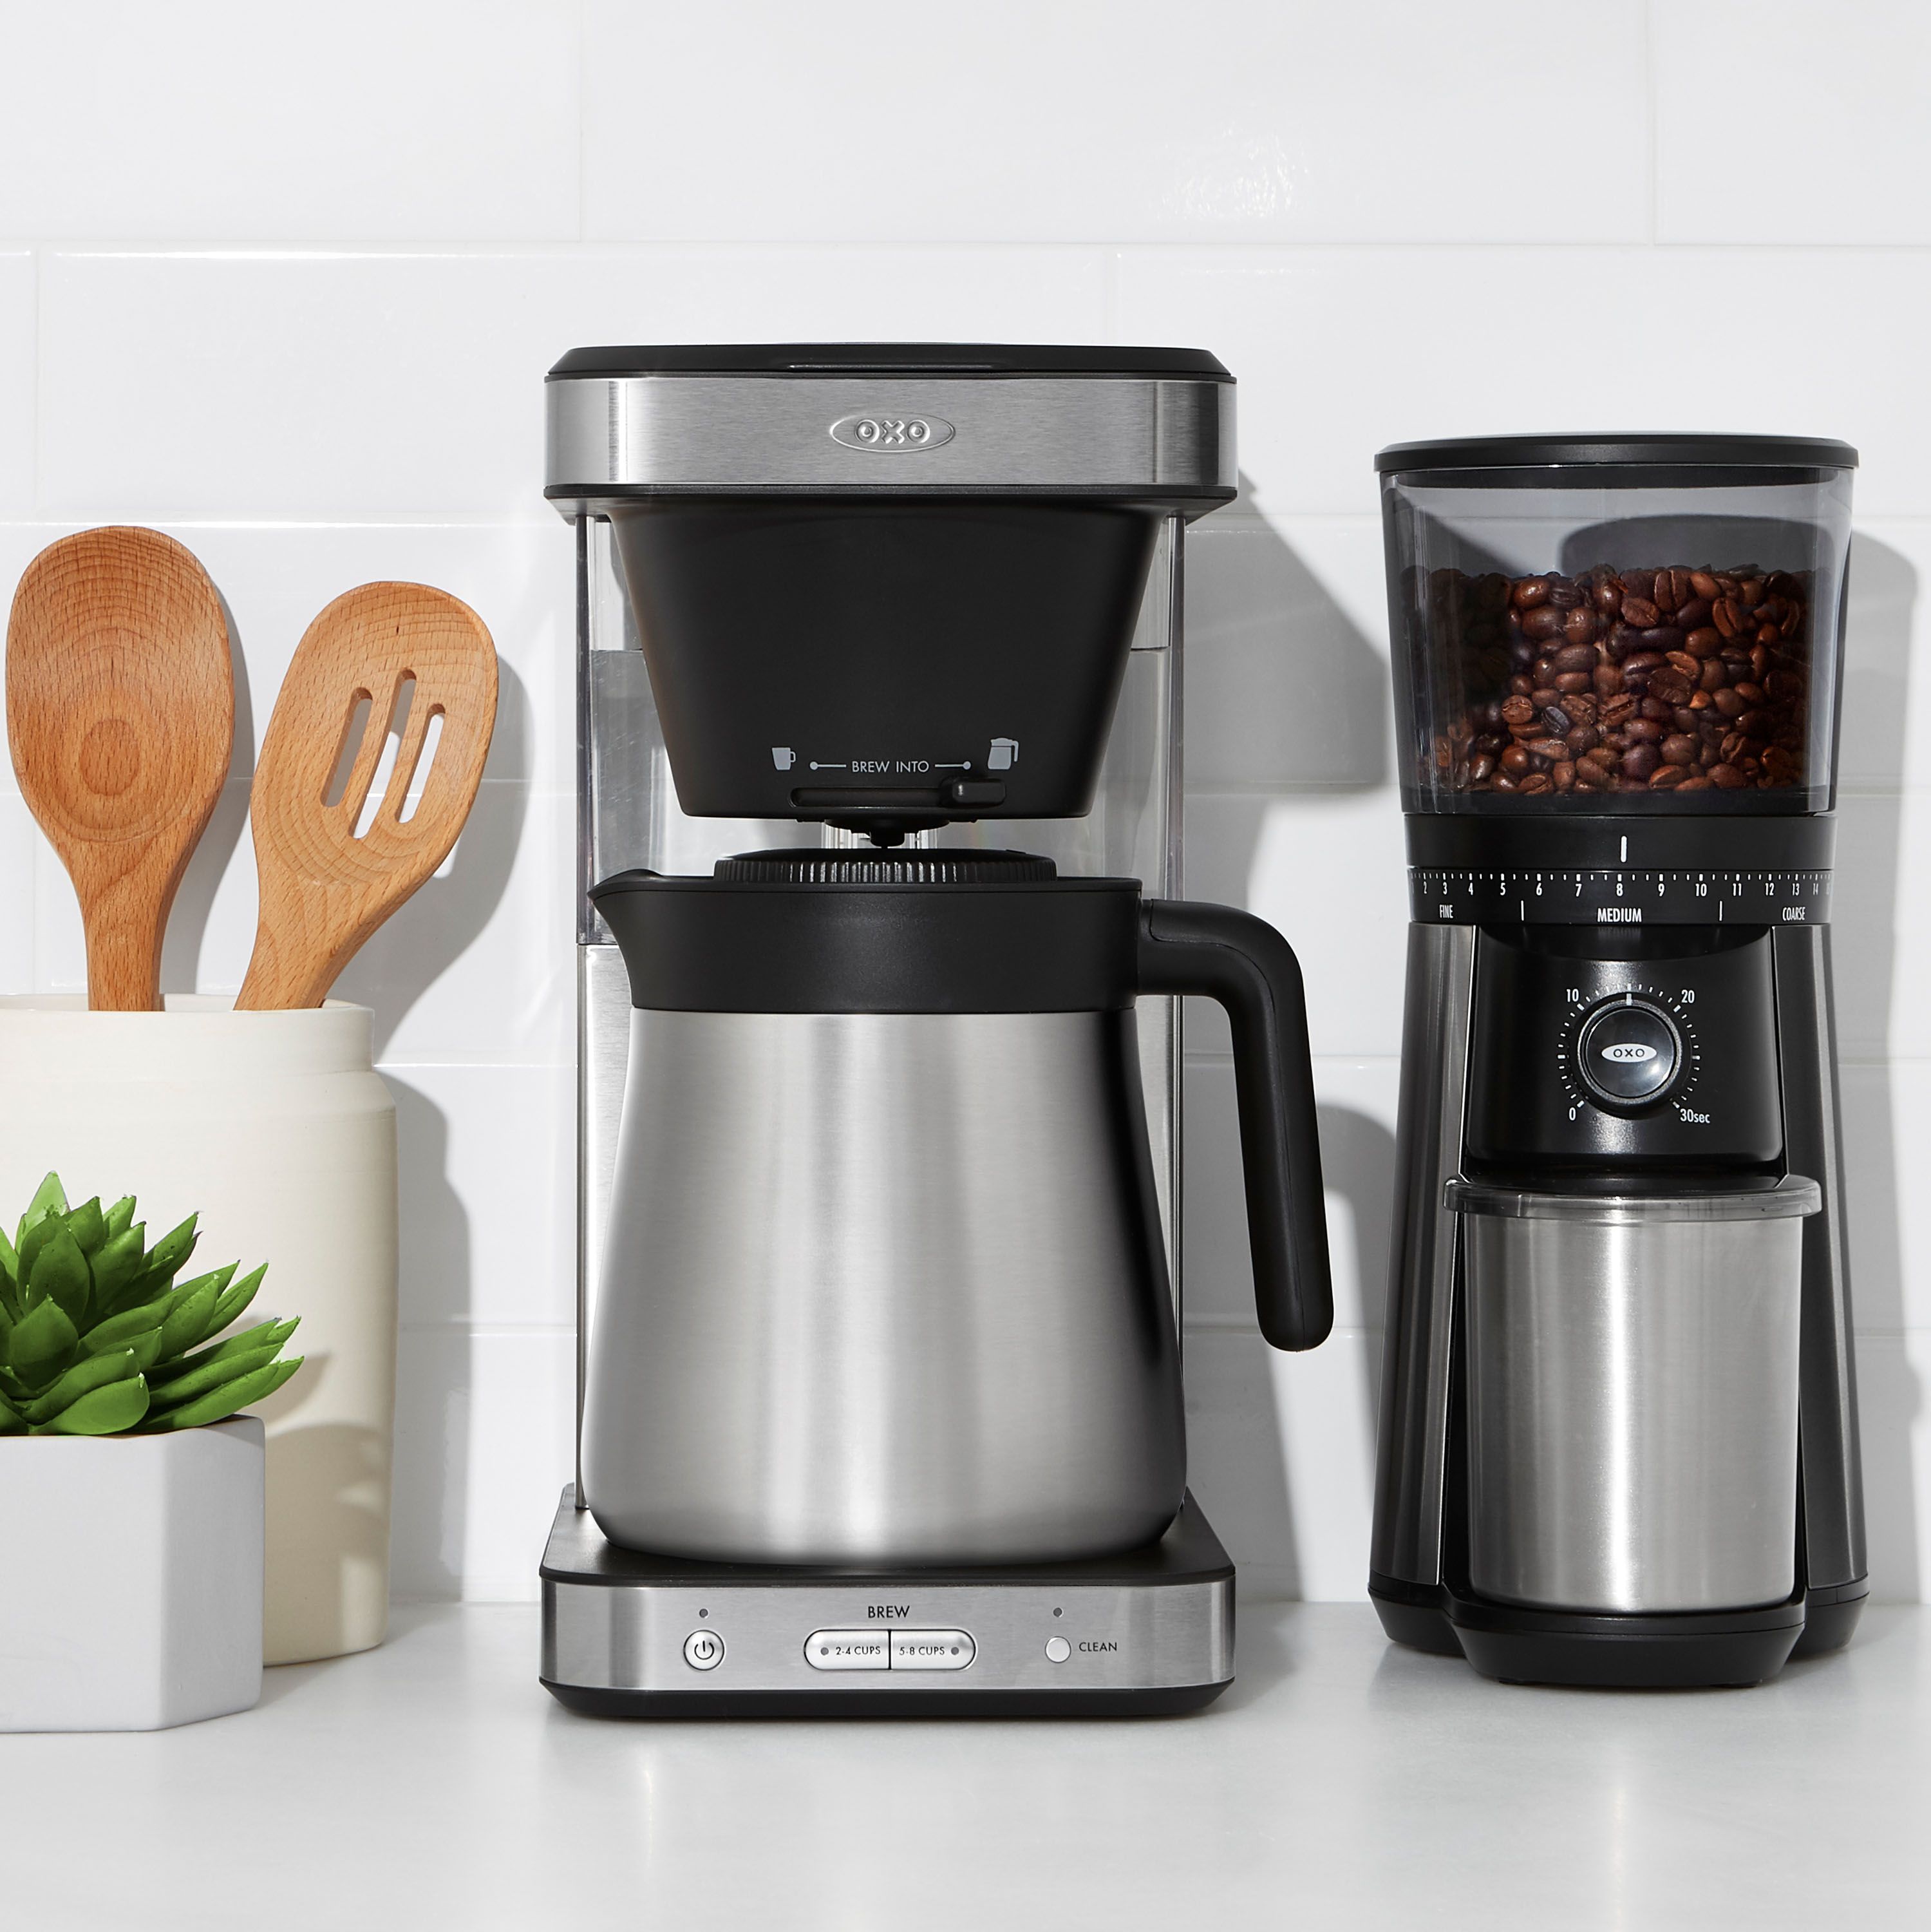 https://hips.hearstapps.com/hmg-prod.s3.amazonaws.com/images/8718800-oxo-brew-8-cup-coffee-maker-ls-with-grinder-1597174435.jpg